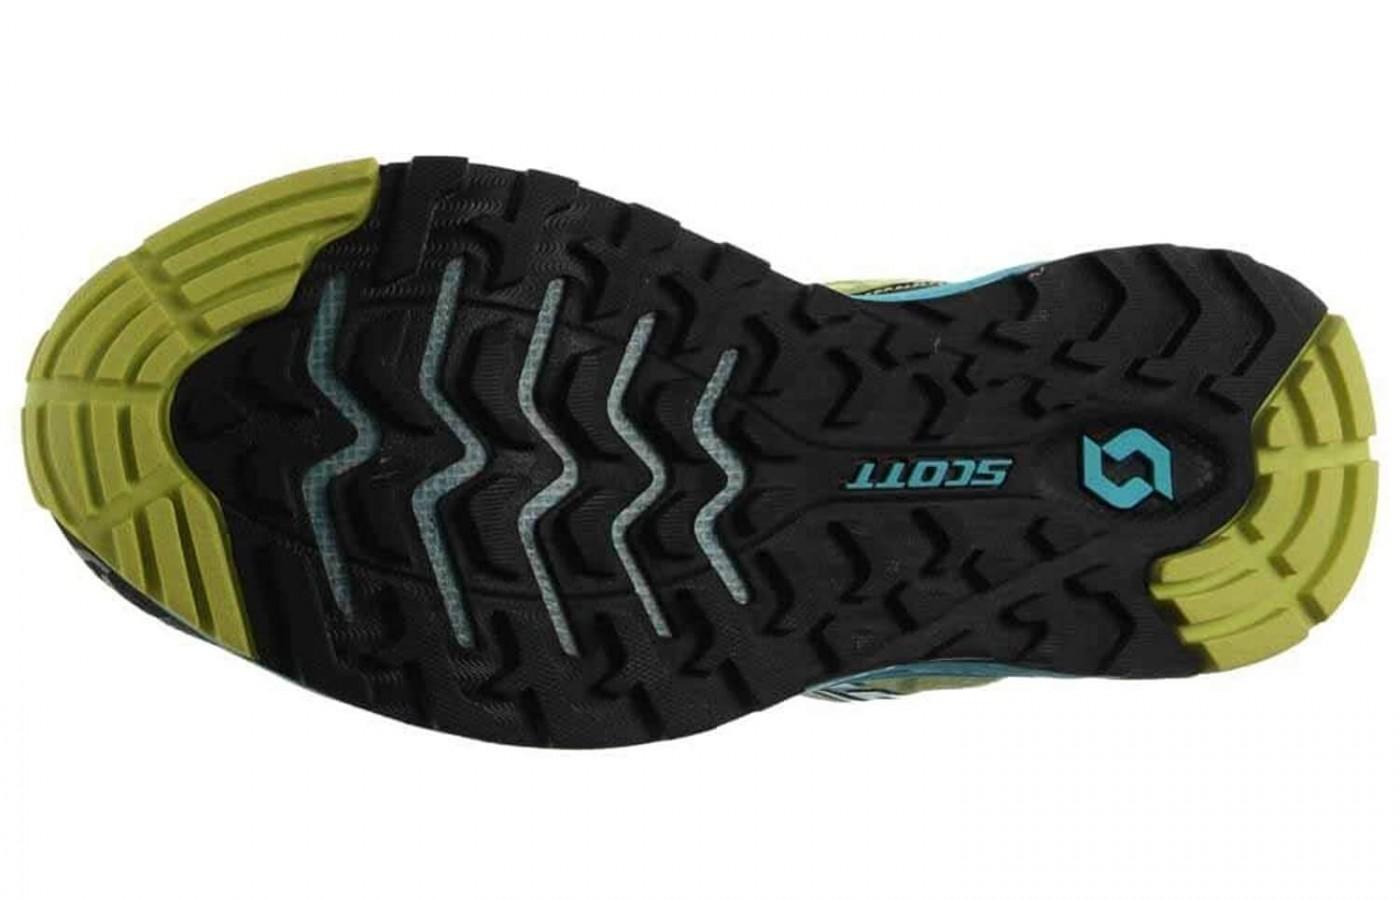 The outsole features a self cleaning lug system